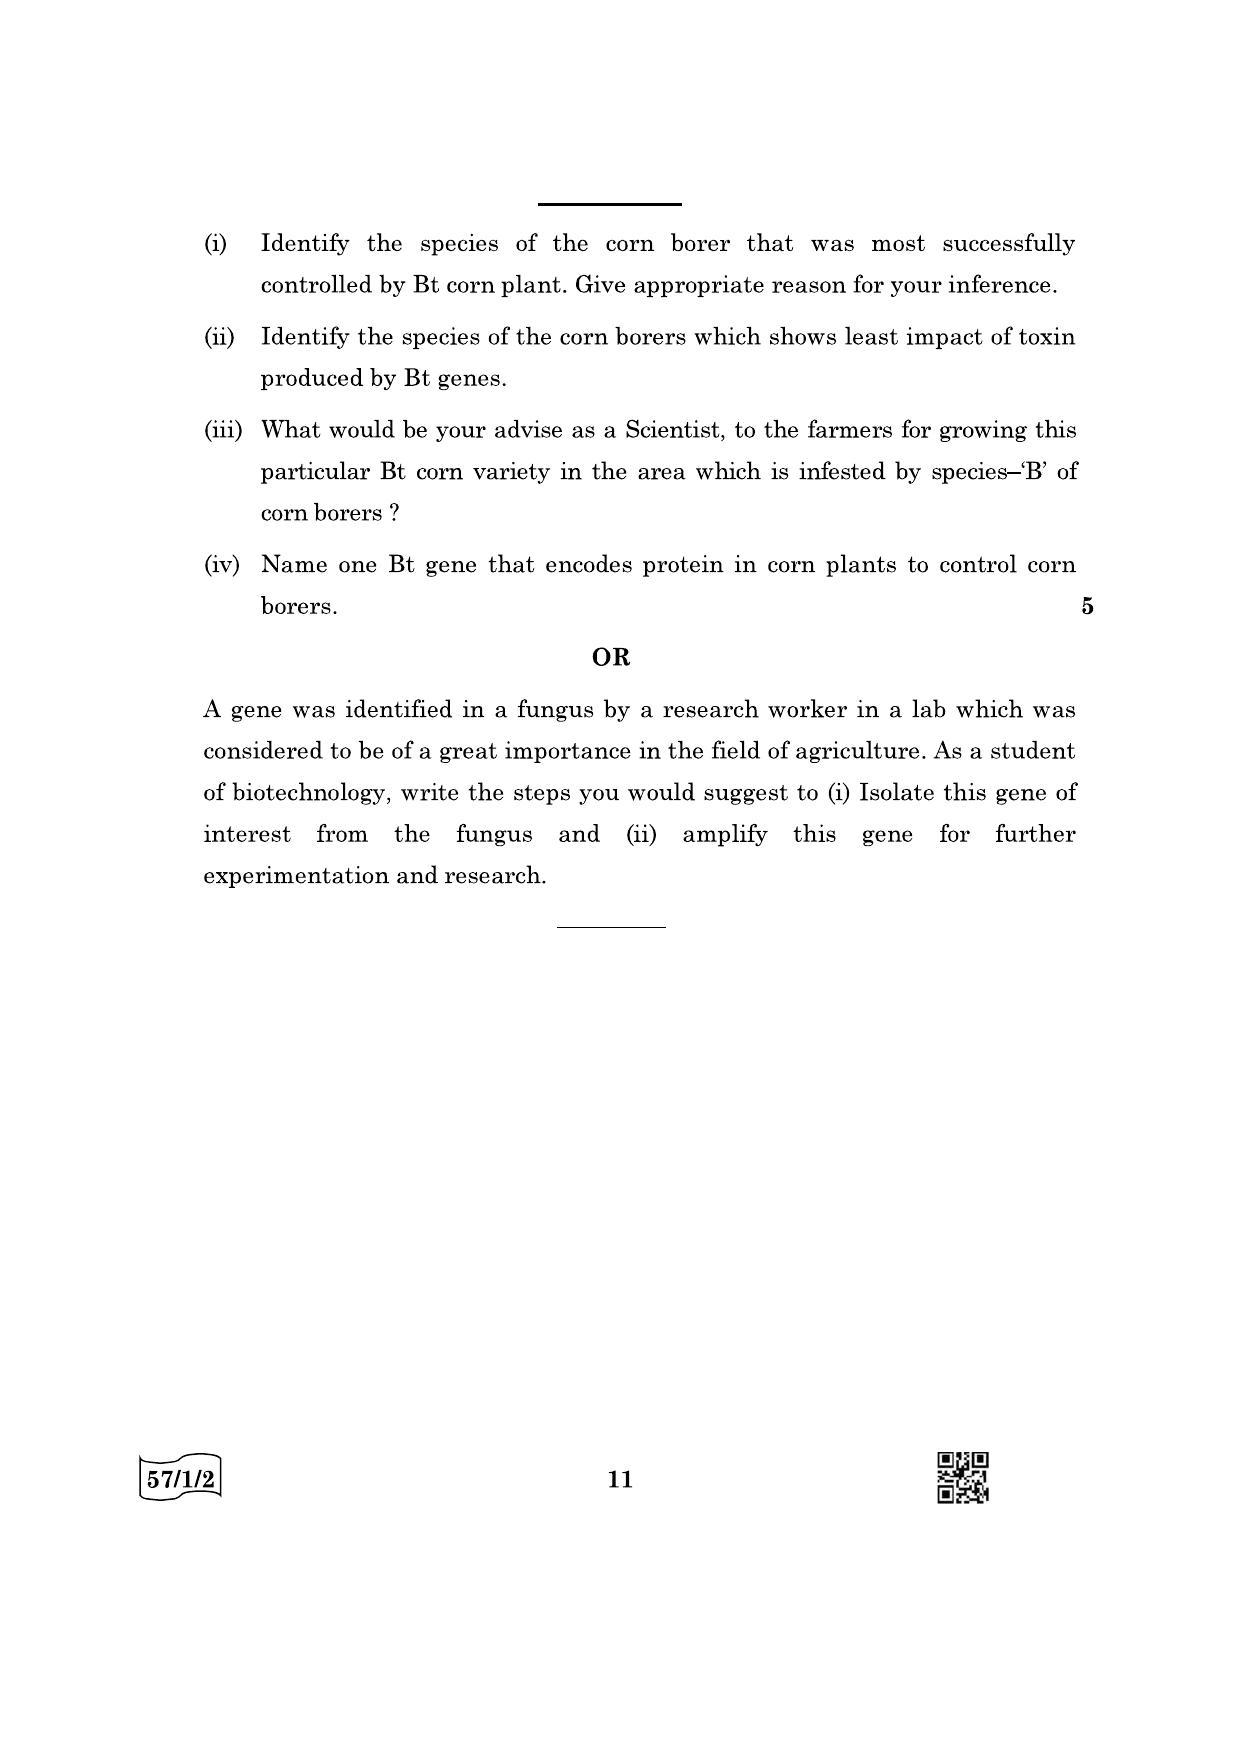 CBSE Class 12 57-1-2 Biology 2022 Question Paper - Page 11